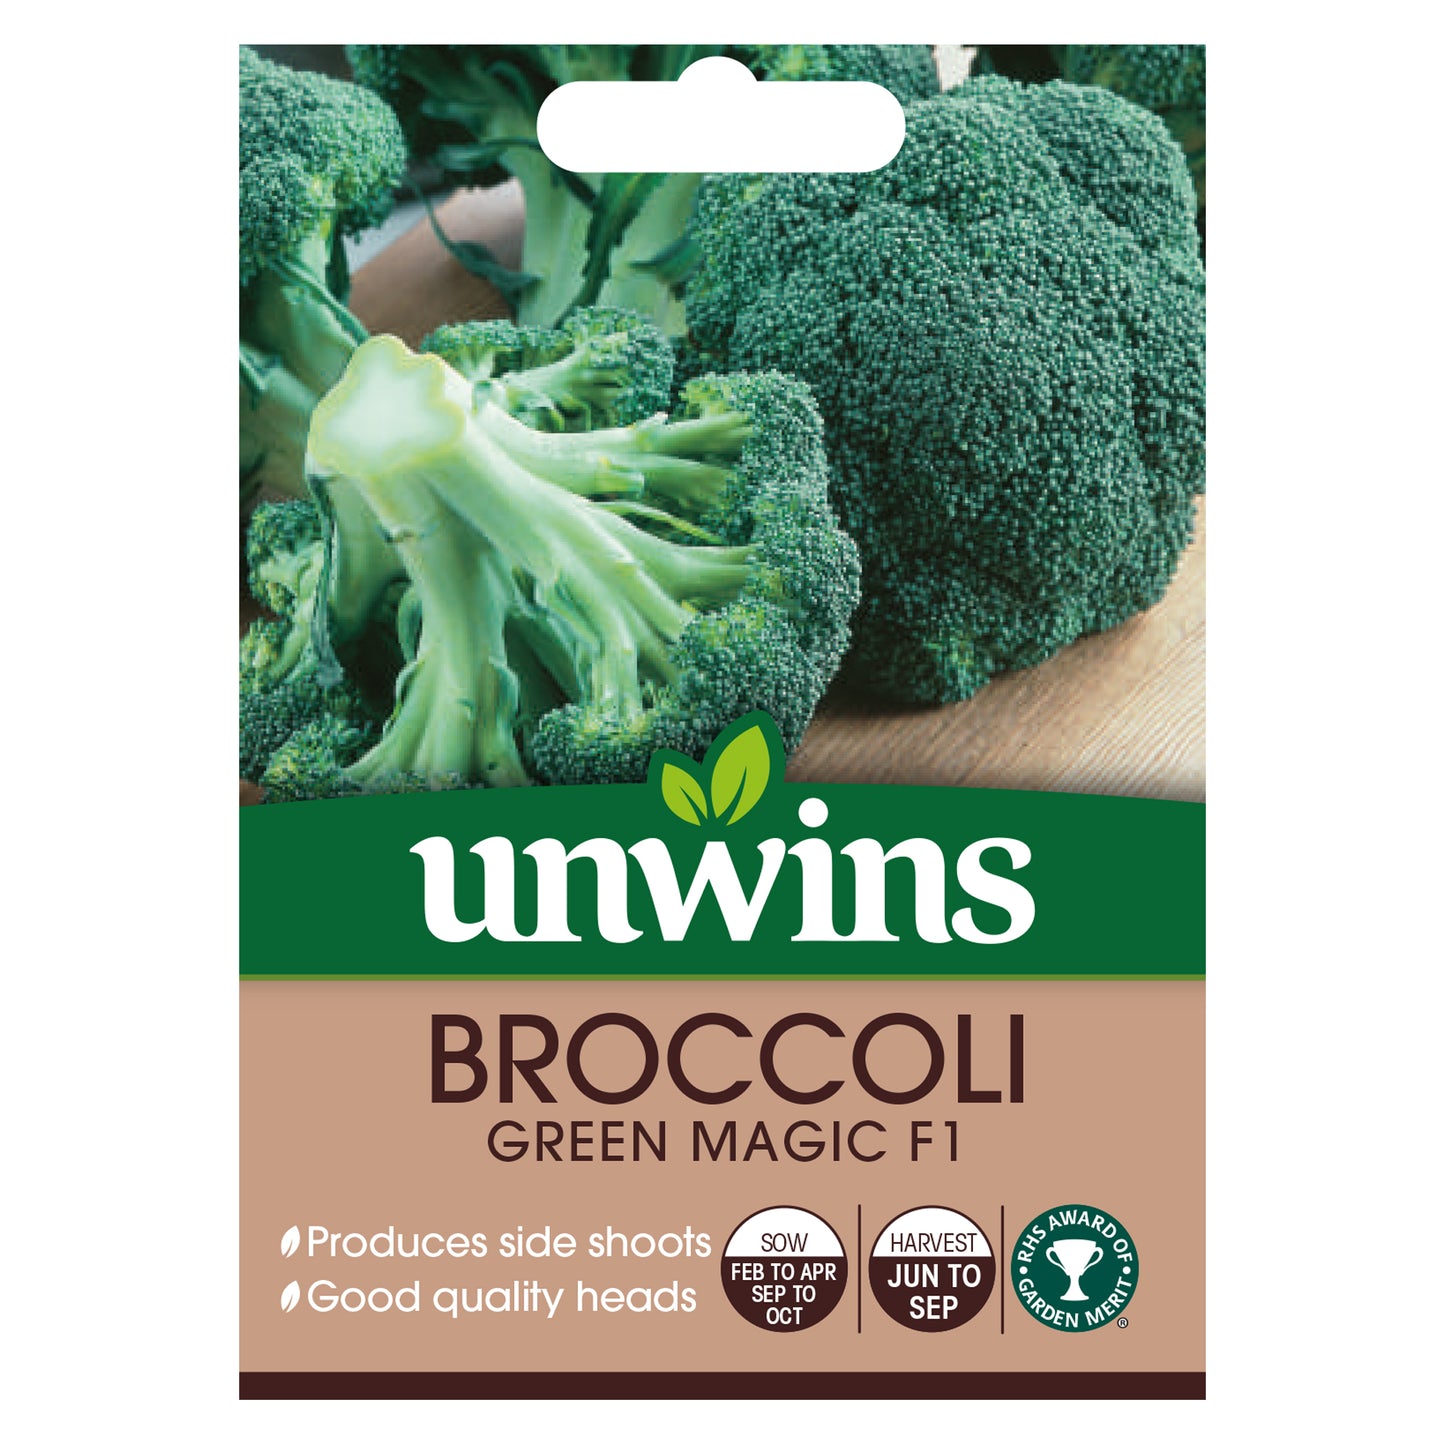 Unwins Calabrese Broccoli Green Magic F1 Seeds - front